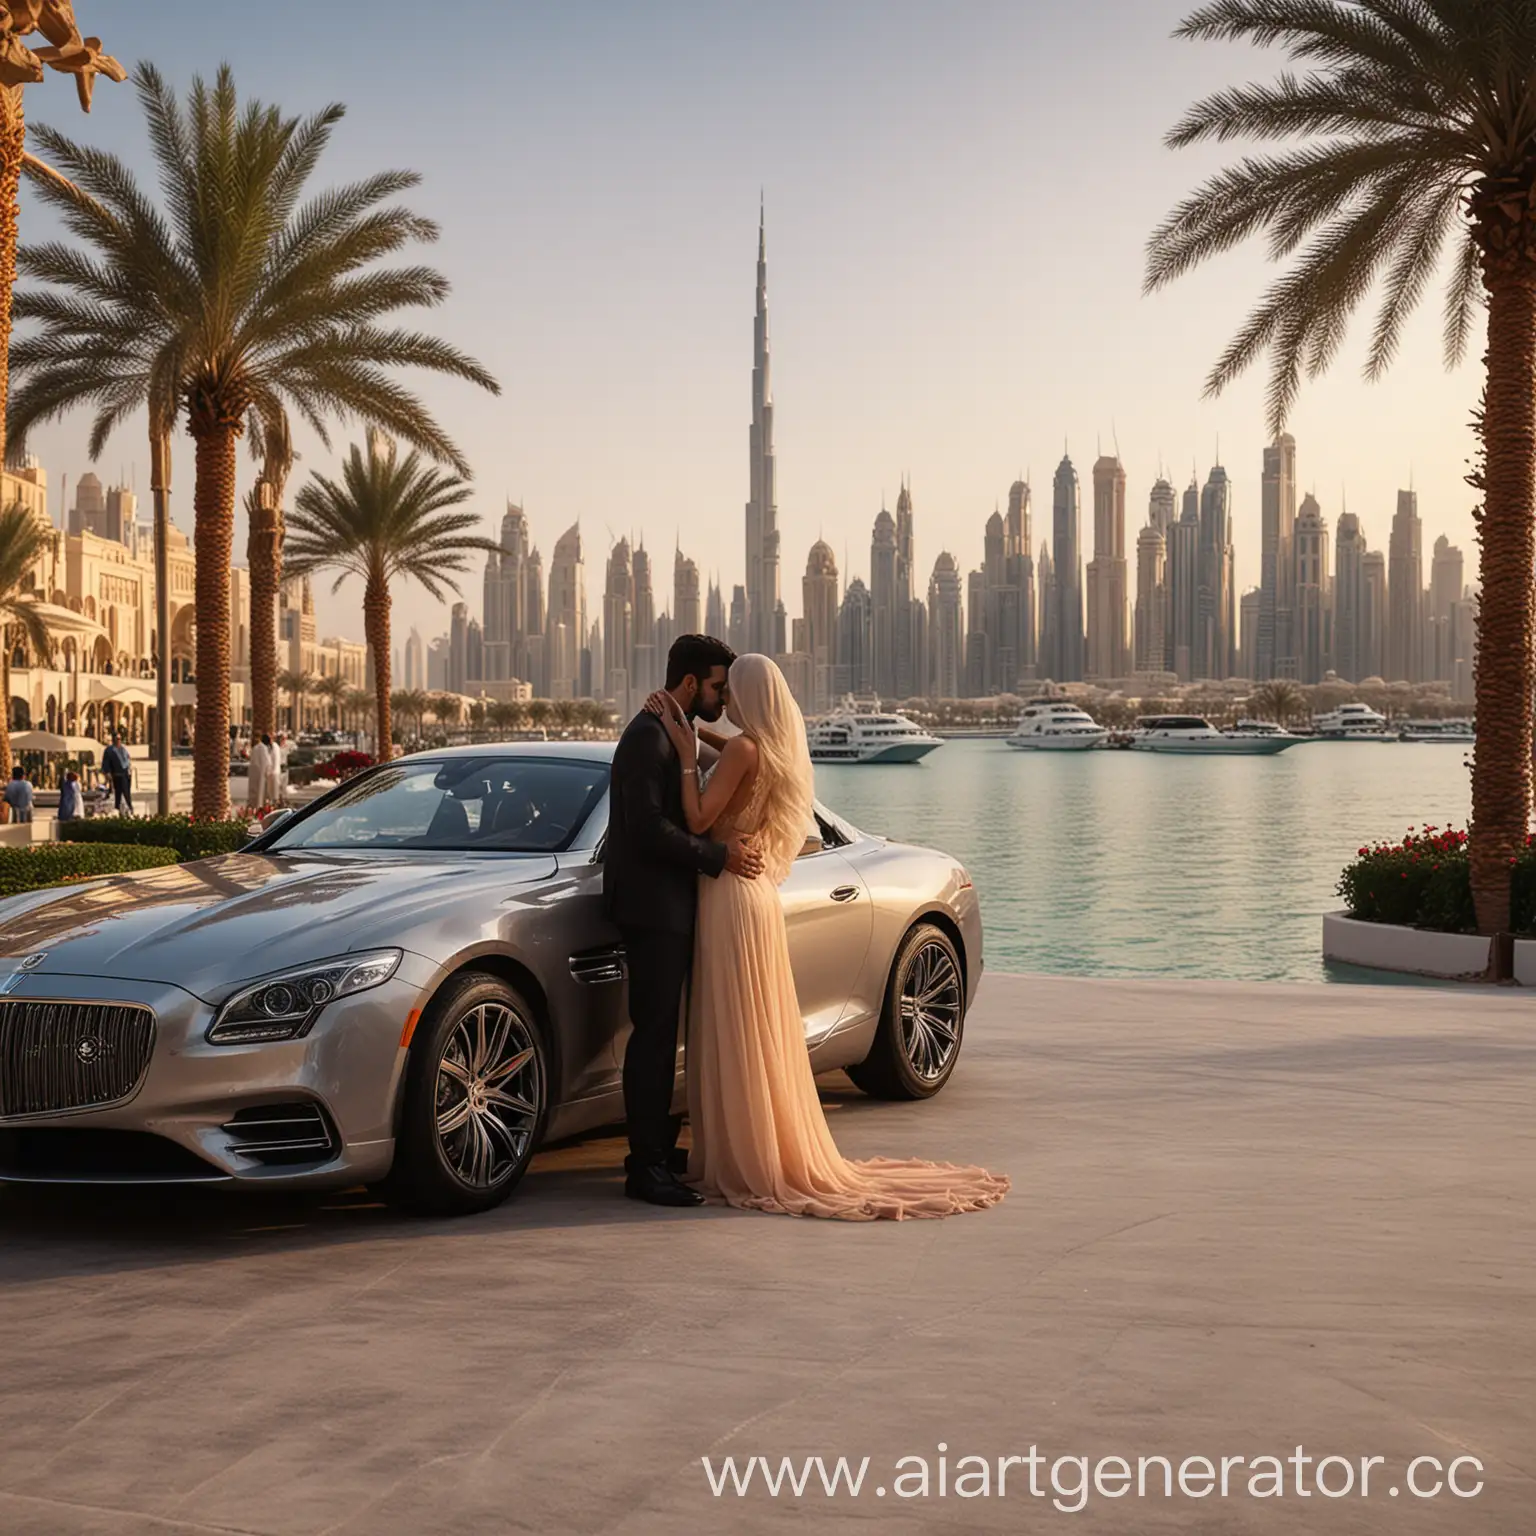 Romantic-Couple-in-Dubai-with-Luxury-Cars-and-Persian-Gulf-View